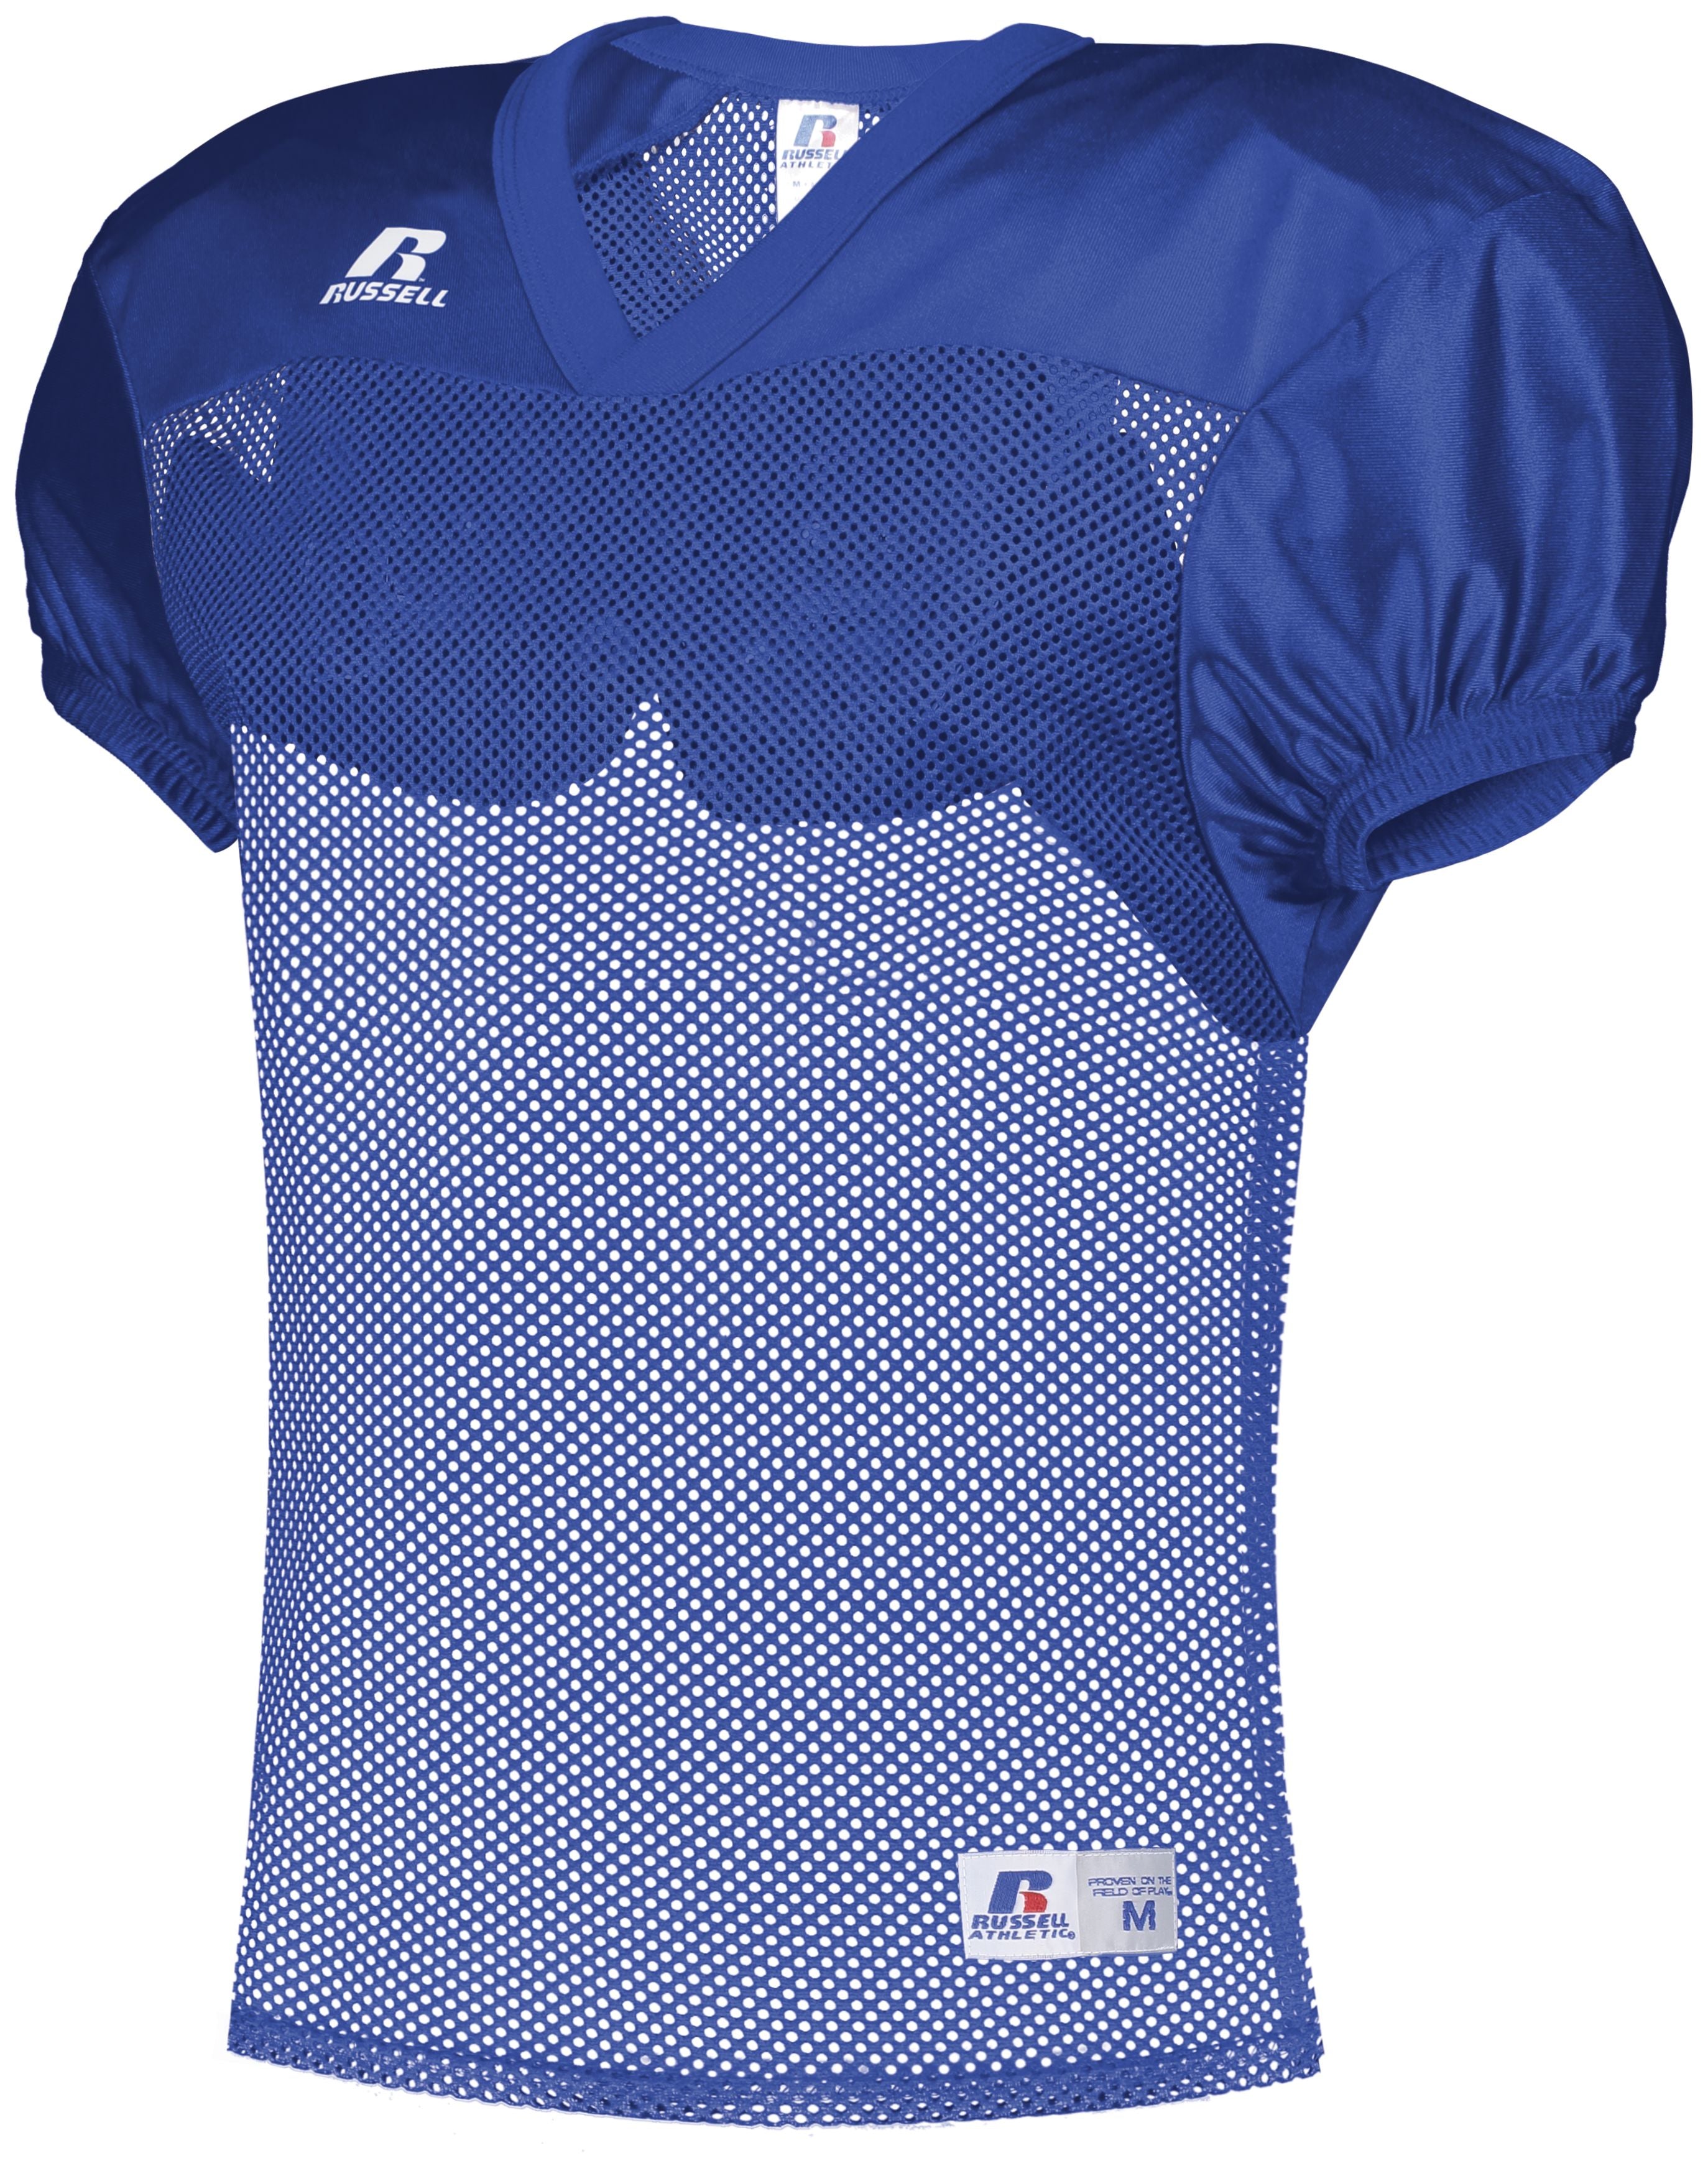 Russell Athletic Stock Practice Jersey in Royal  -Part of the Adult, Adult-Jersey, Football, Russell-Athletic-Products, Shirts, All-Sports, All-Sports-1 product lines at KanaleyCreations.com